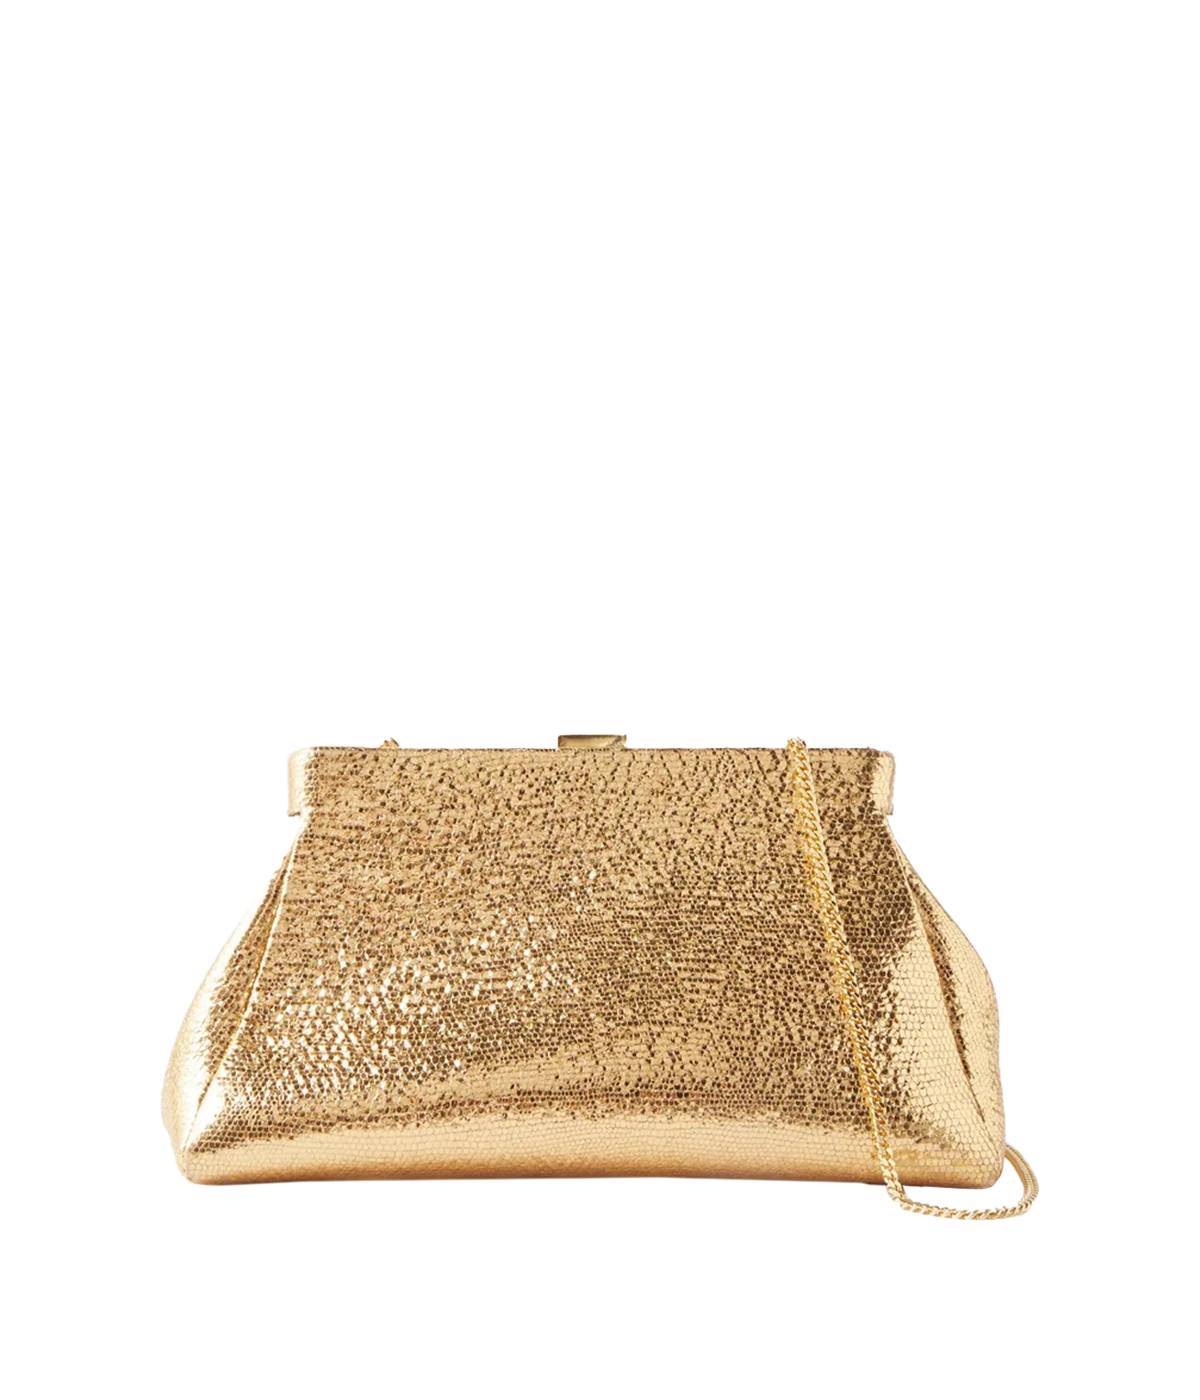 Cannes Bag in Gold Metallic